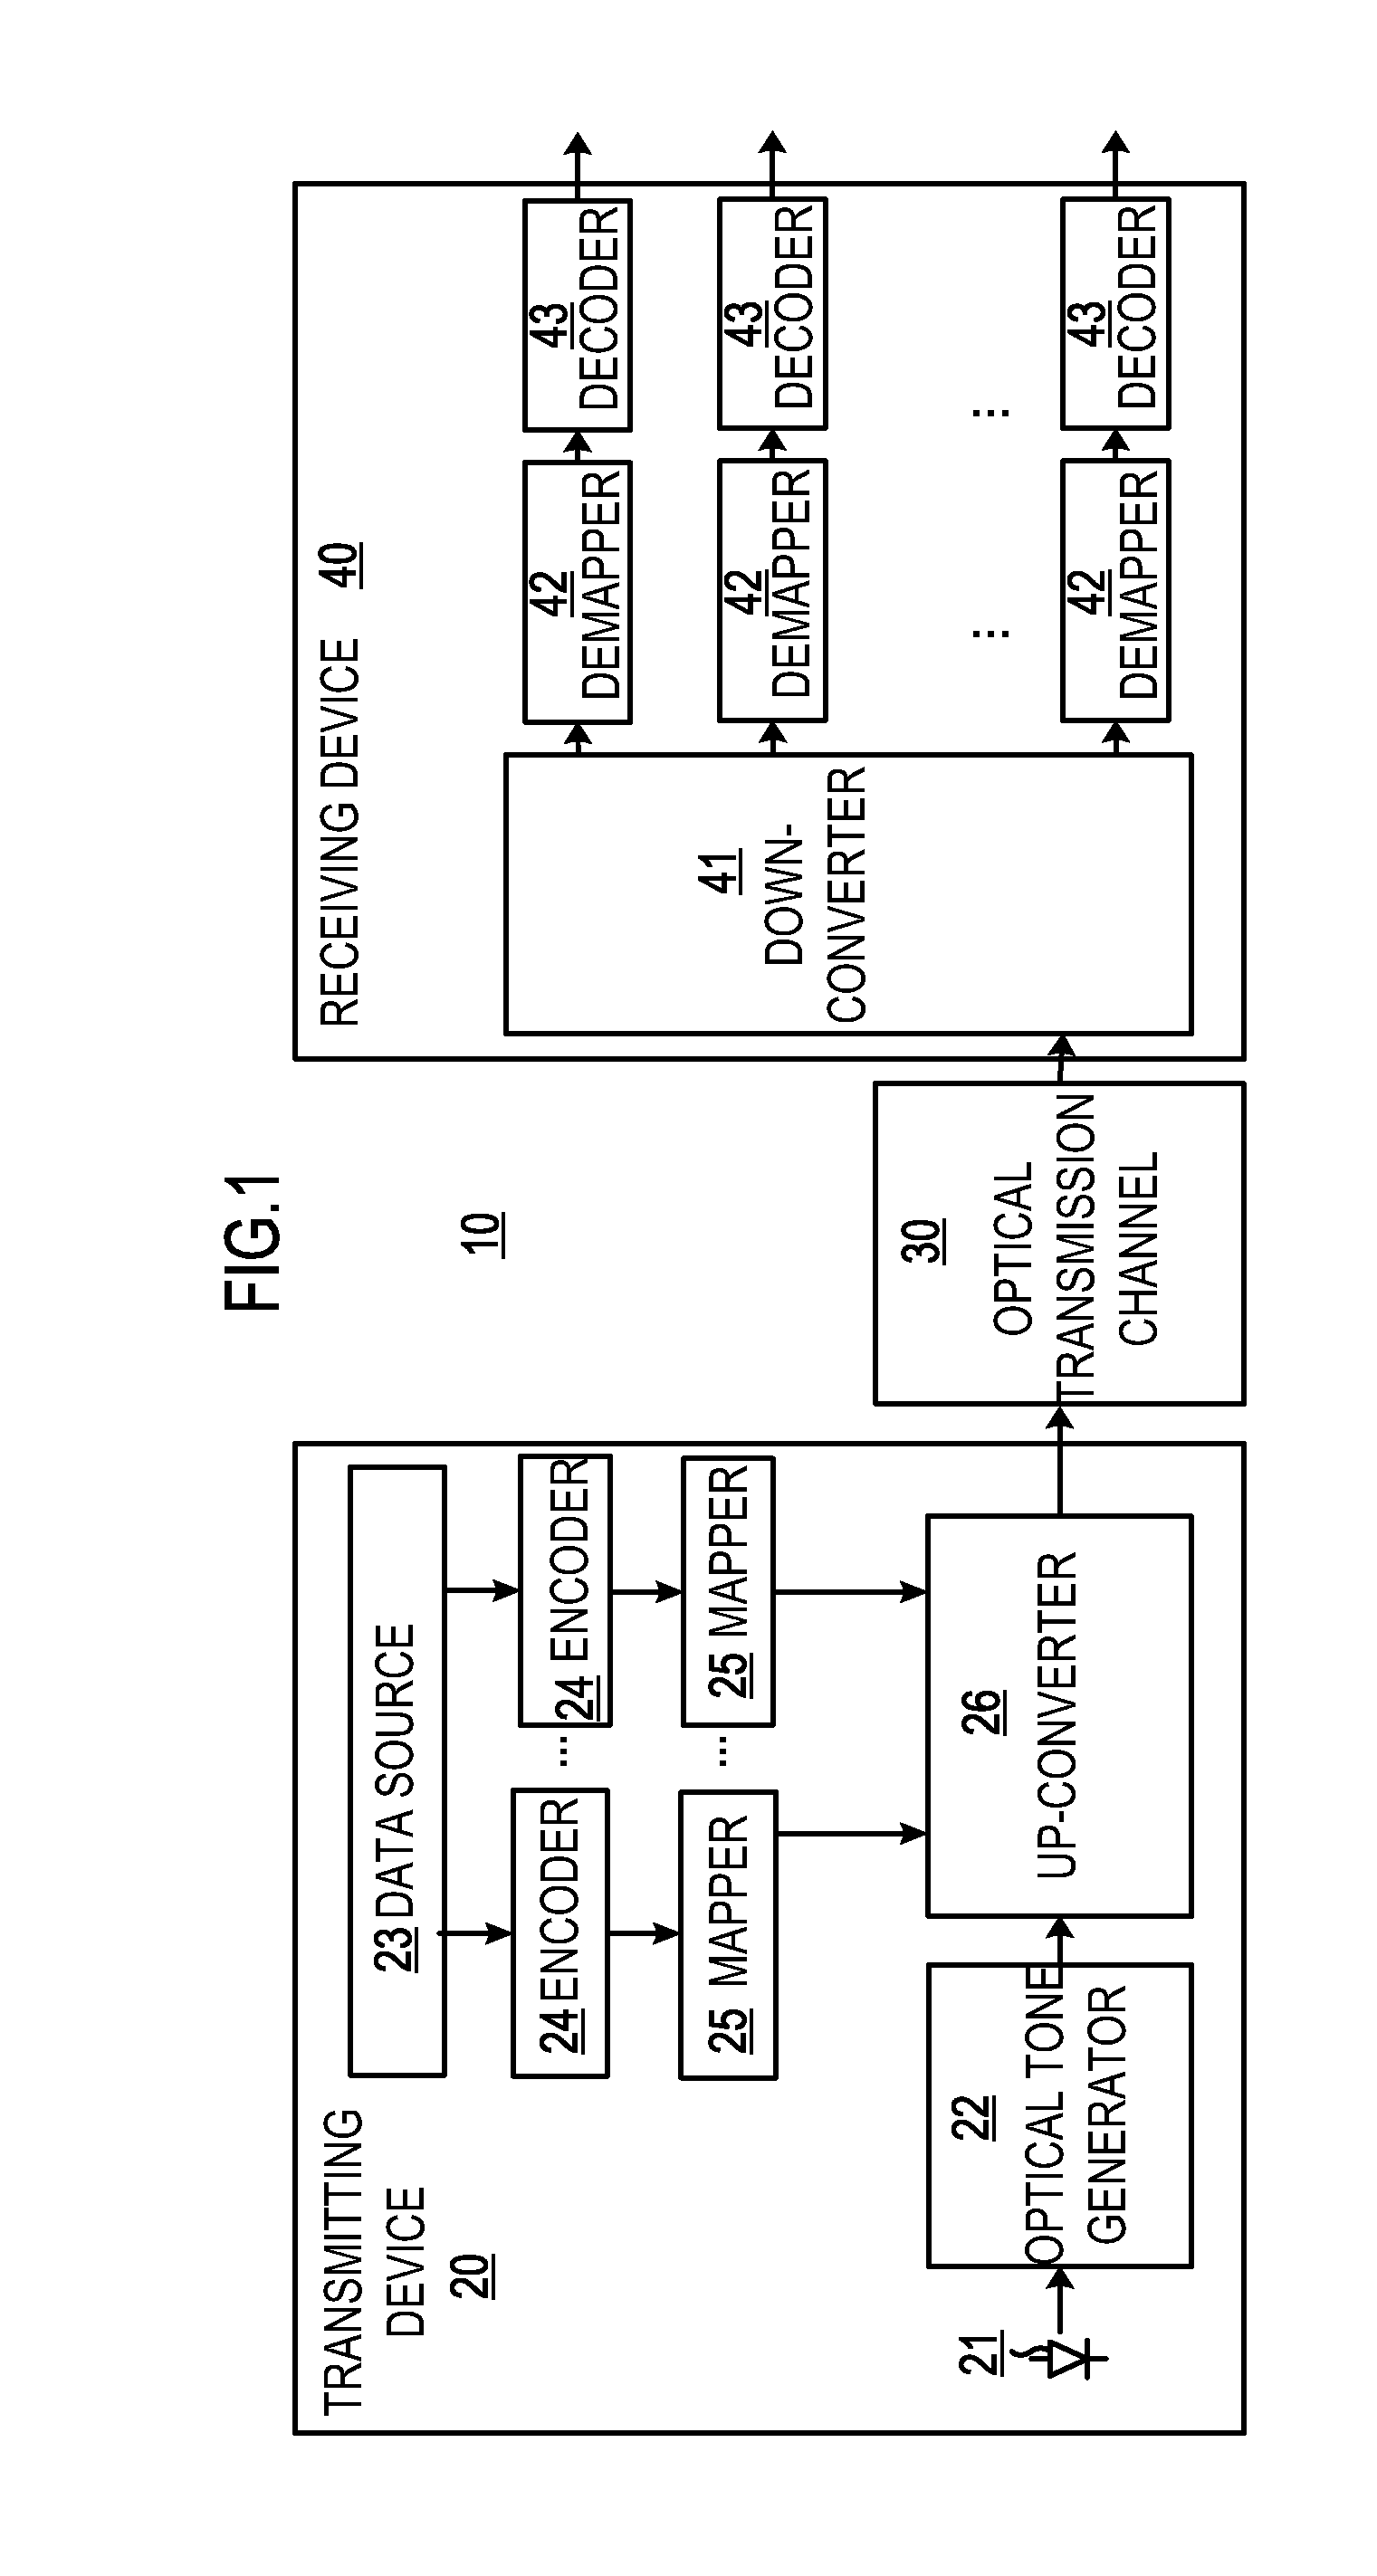 Optical Communication System, Device and Method Employing Advanced Coding and High Modulation Order